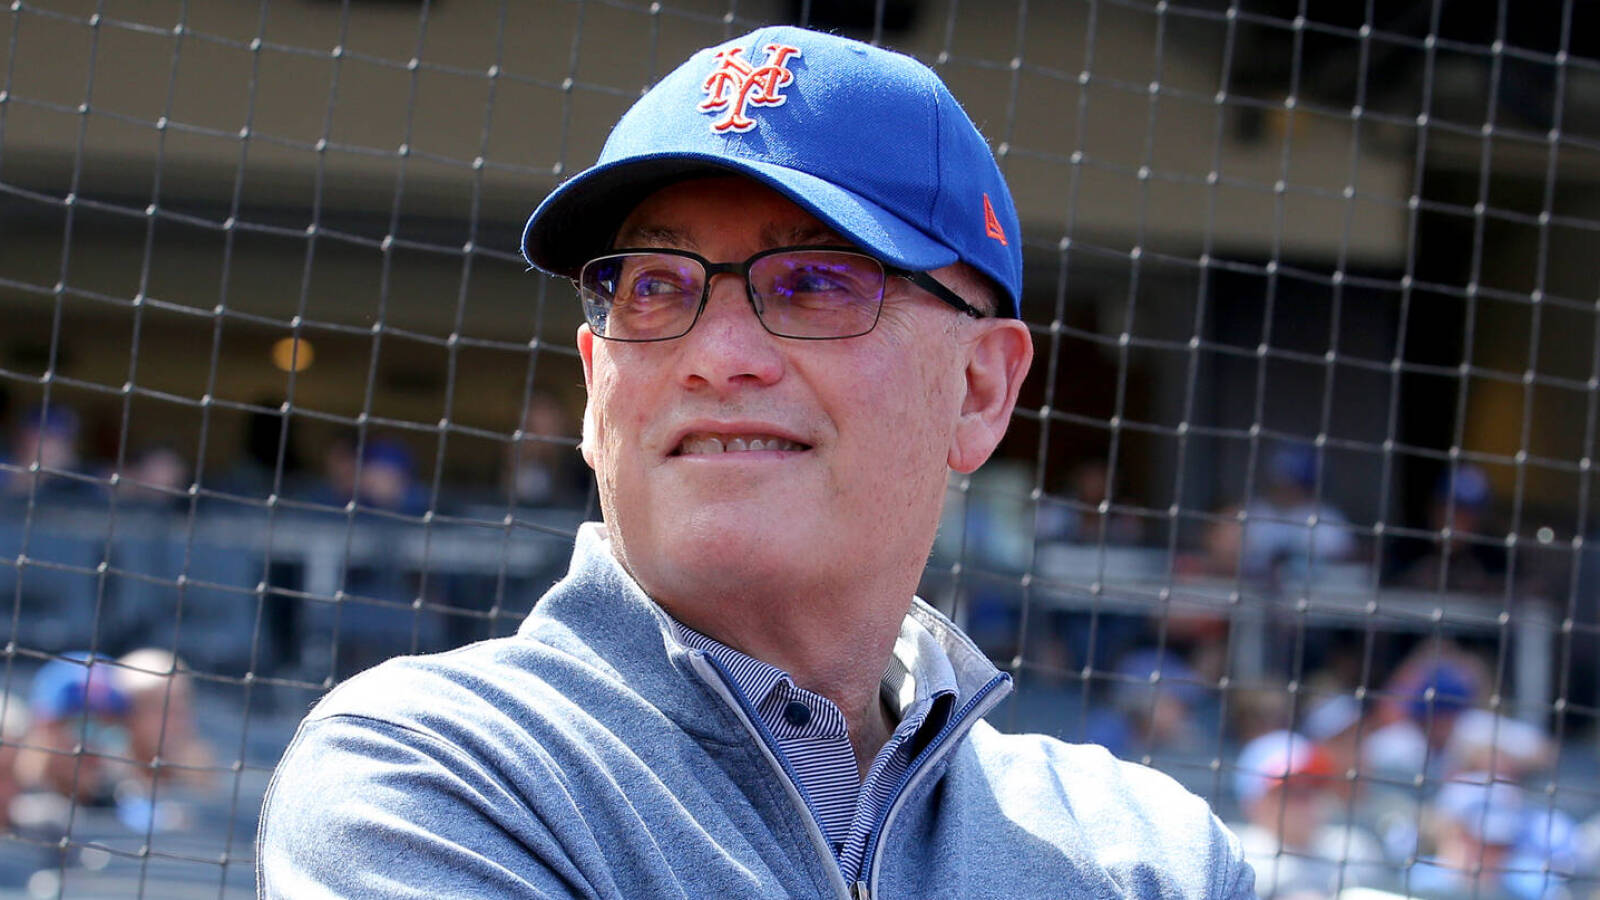 Steve Cohen addresses if Mets could again be trade deadline sellers